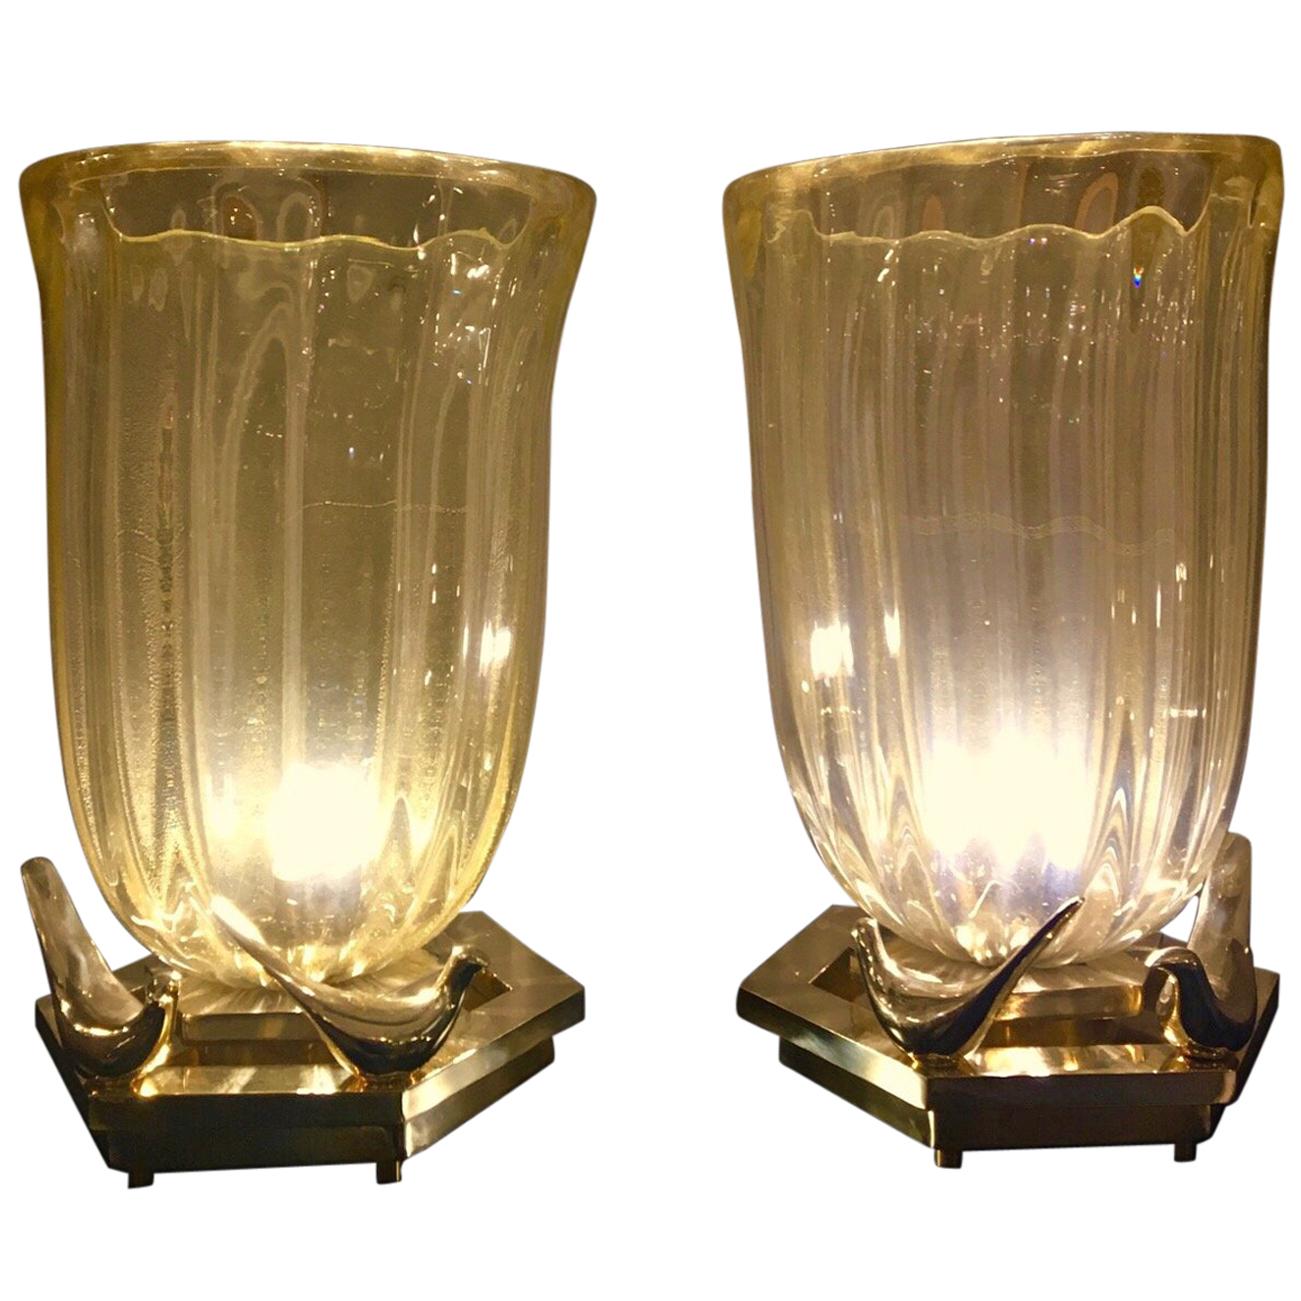 Pair of Murano Glass Infused with Gold Flecks Brass Base with Brass Birds, 1980s